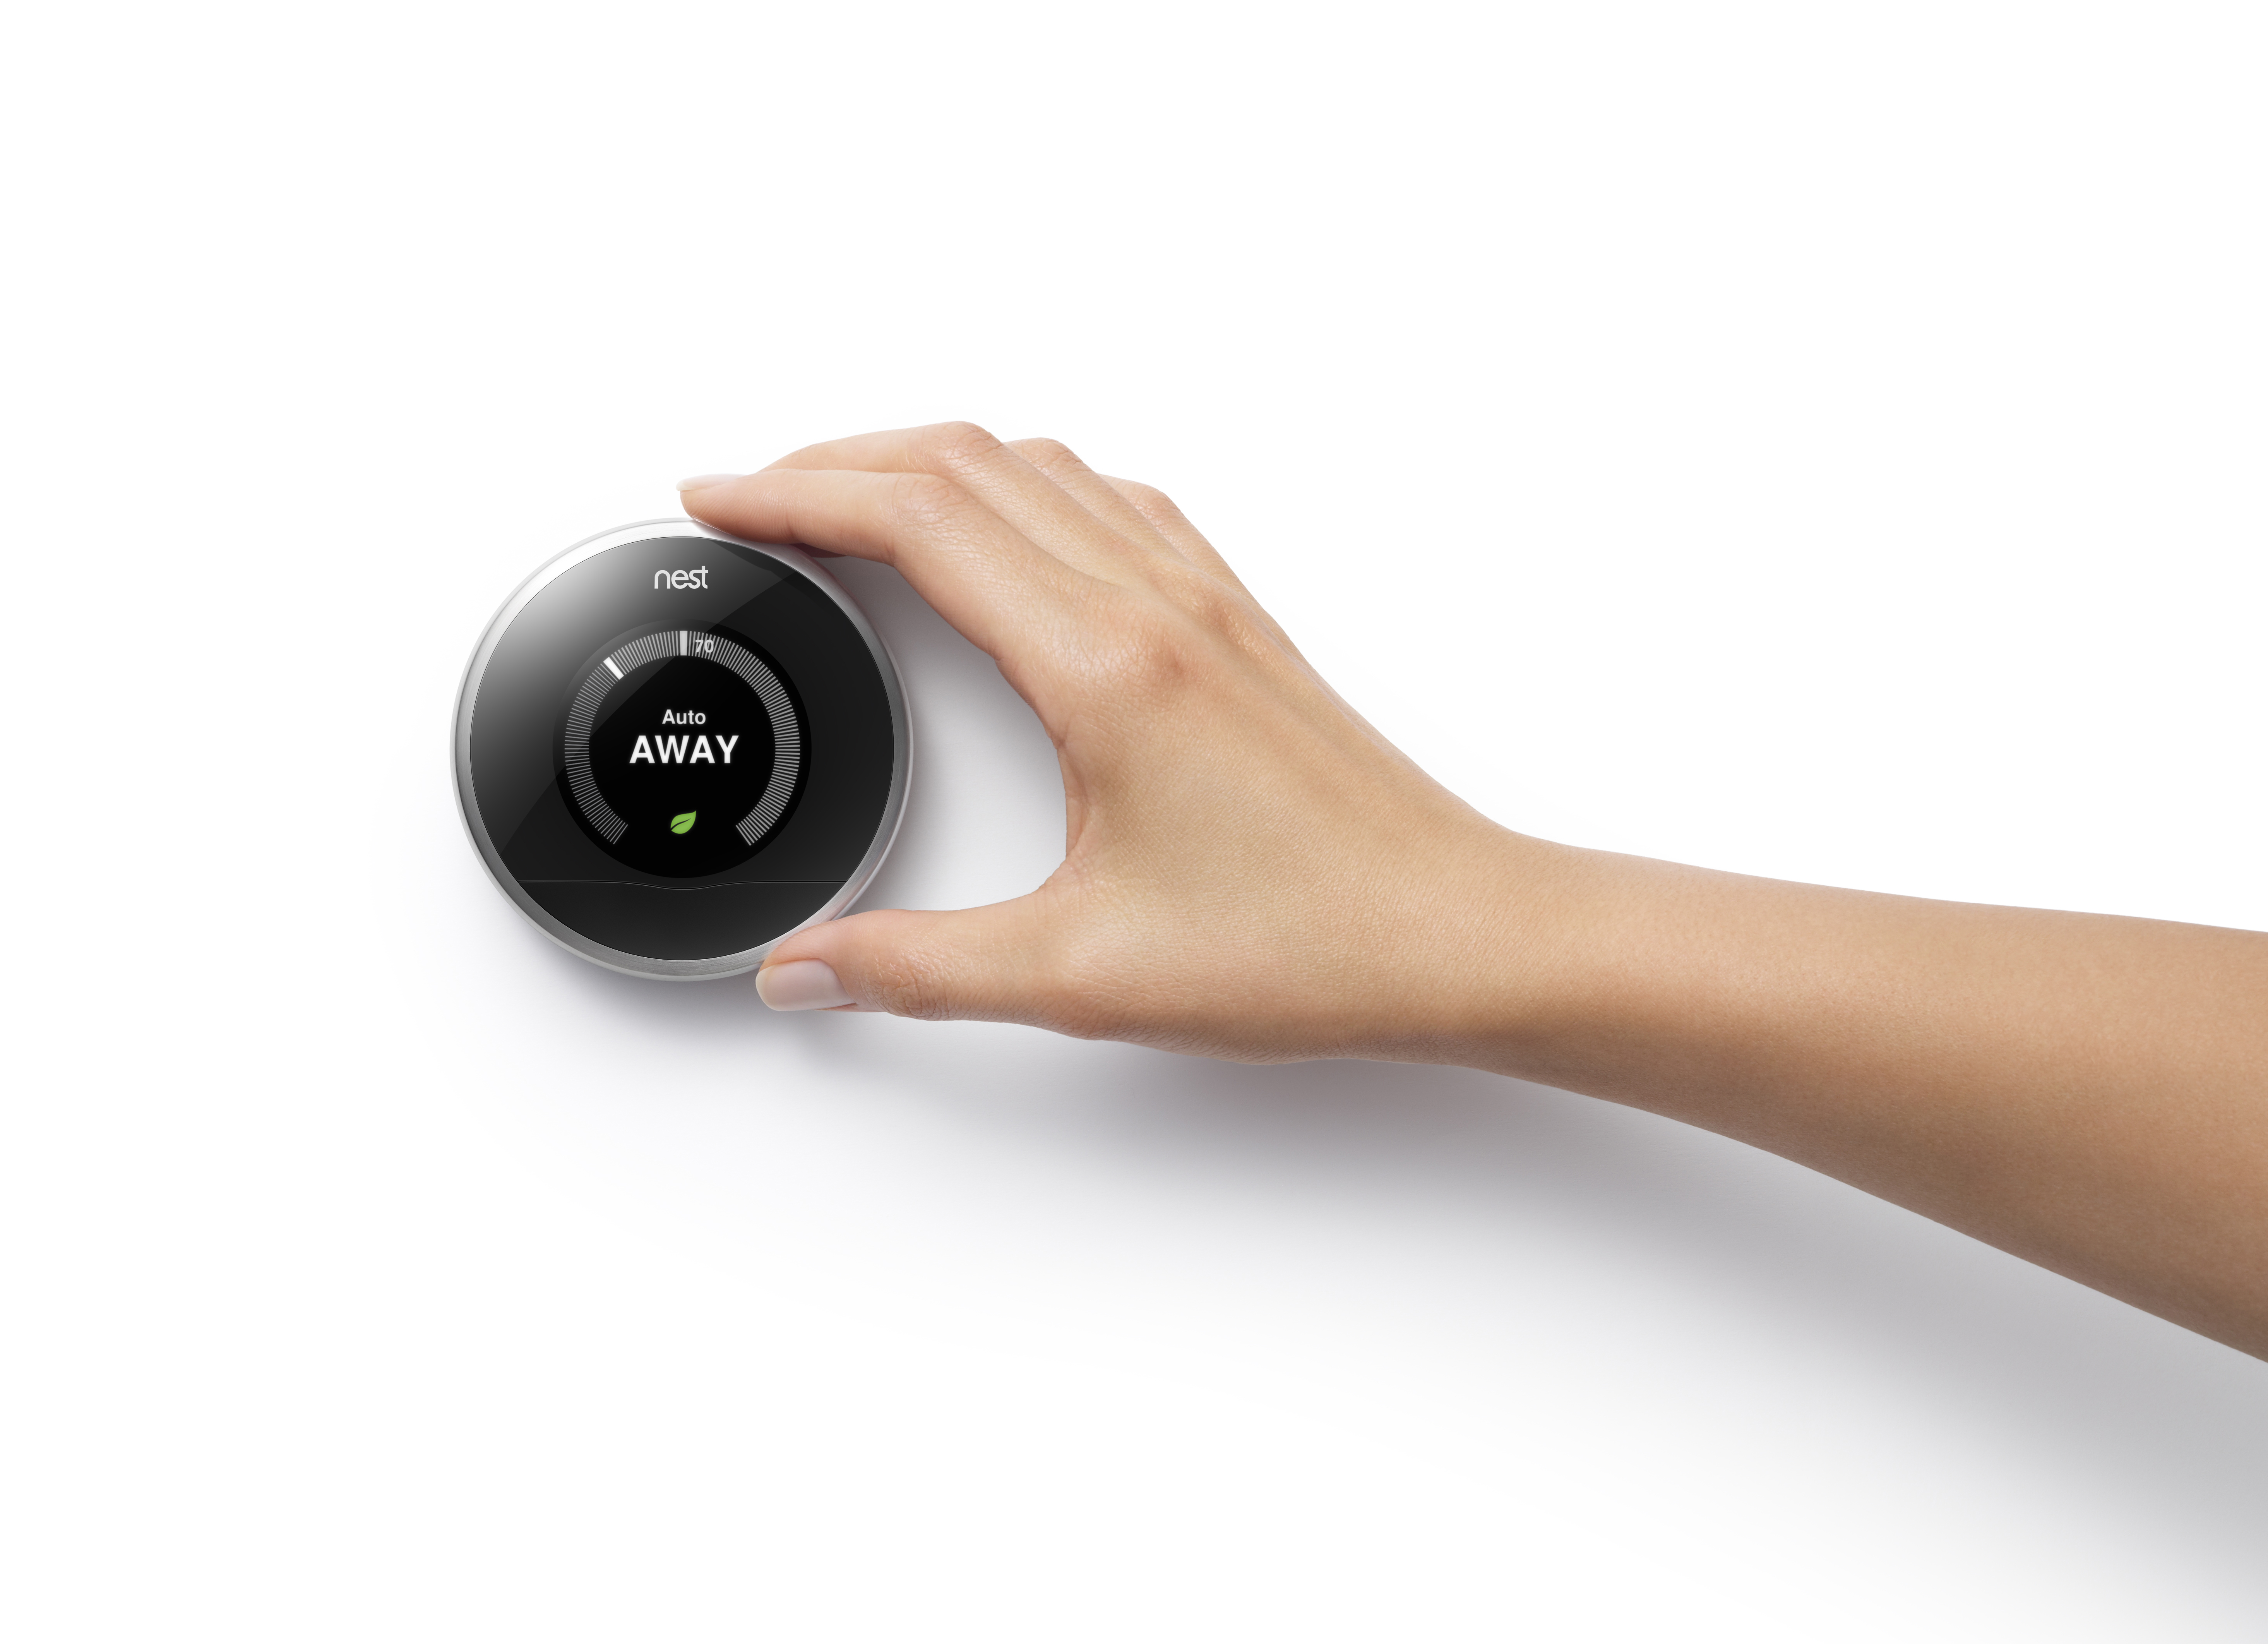 Wiring the house: how the Nest Learning Thermostat automates heat and AC